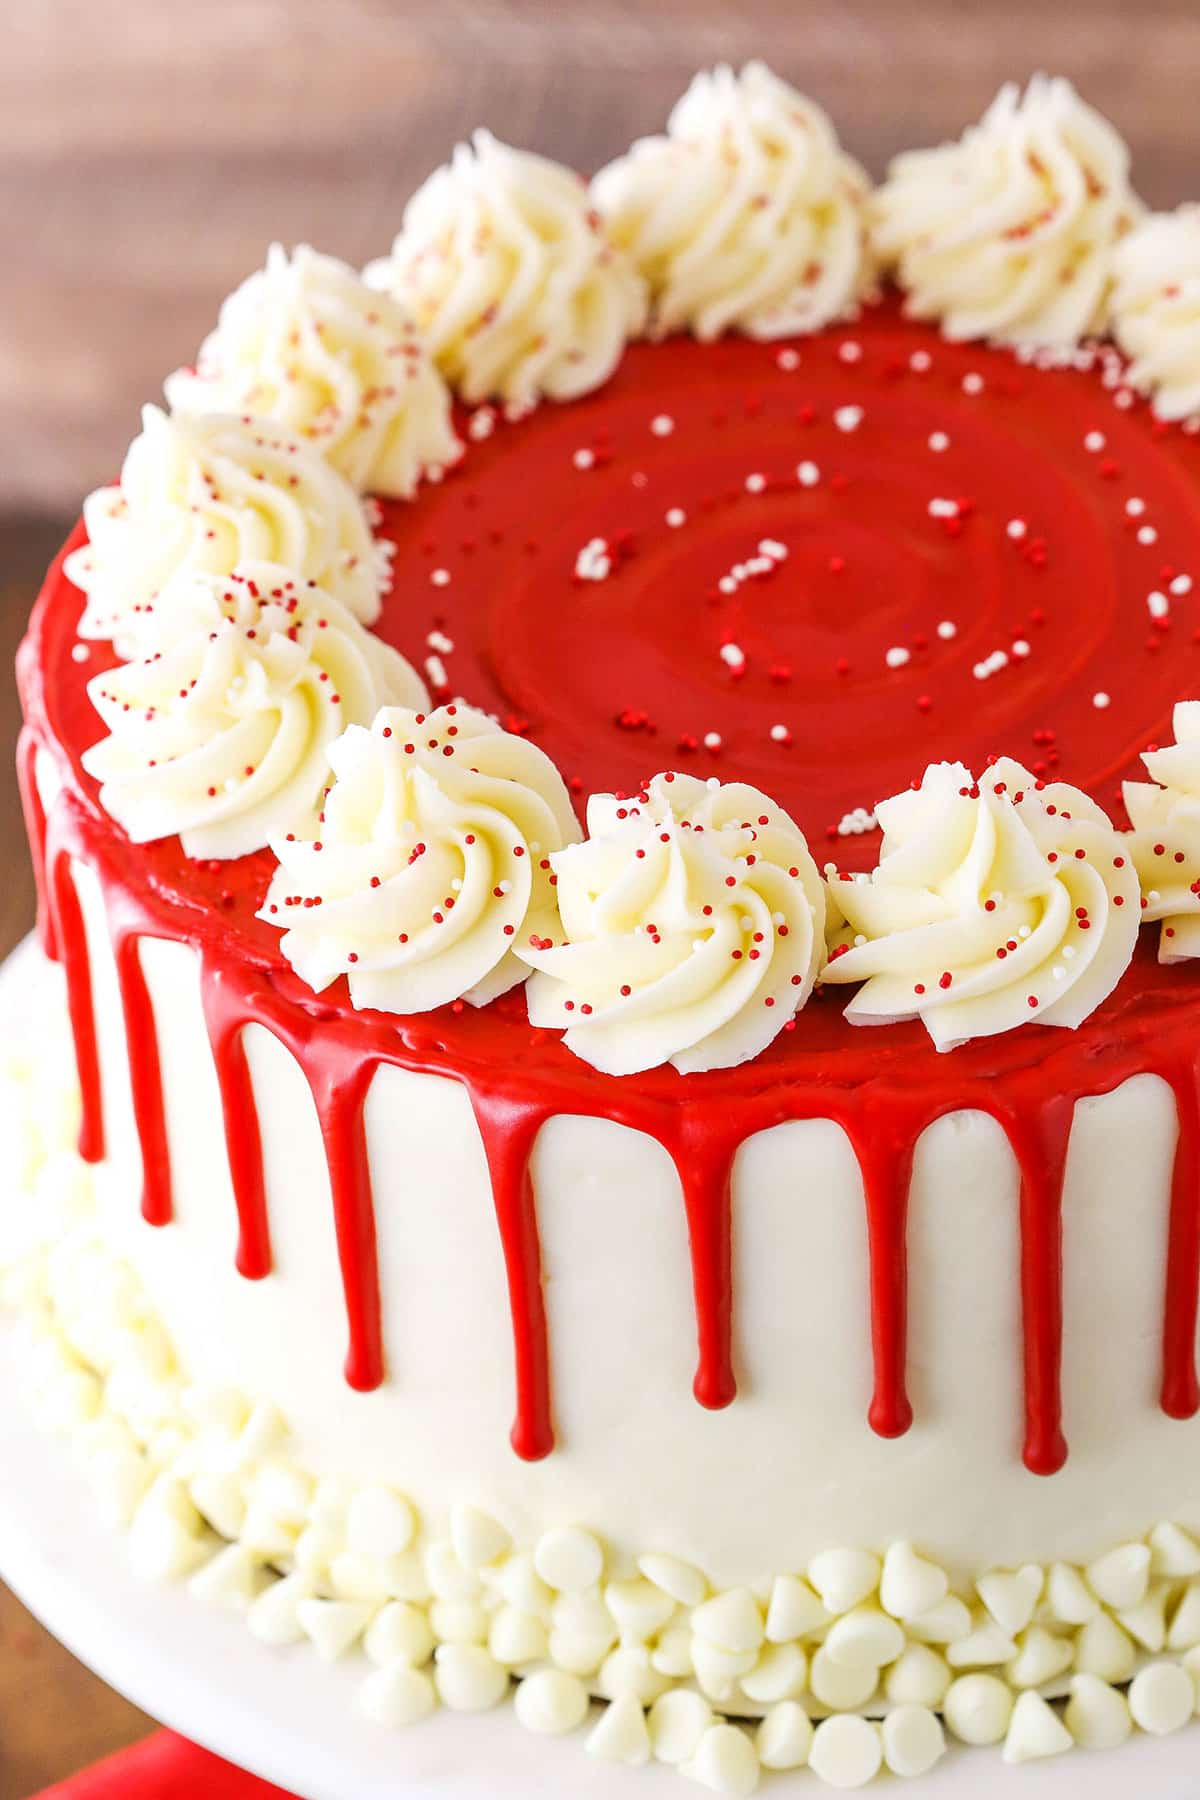 Overhead view of a full Red Velvet Cheesecake Cake on a white cake stand